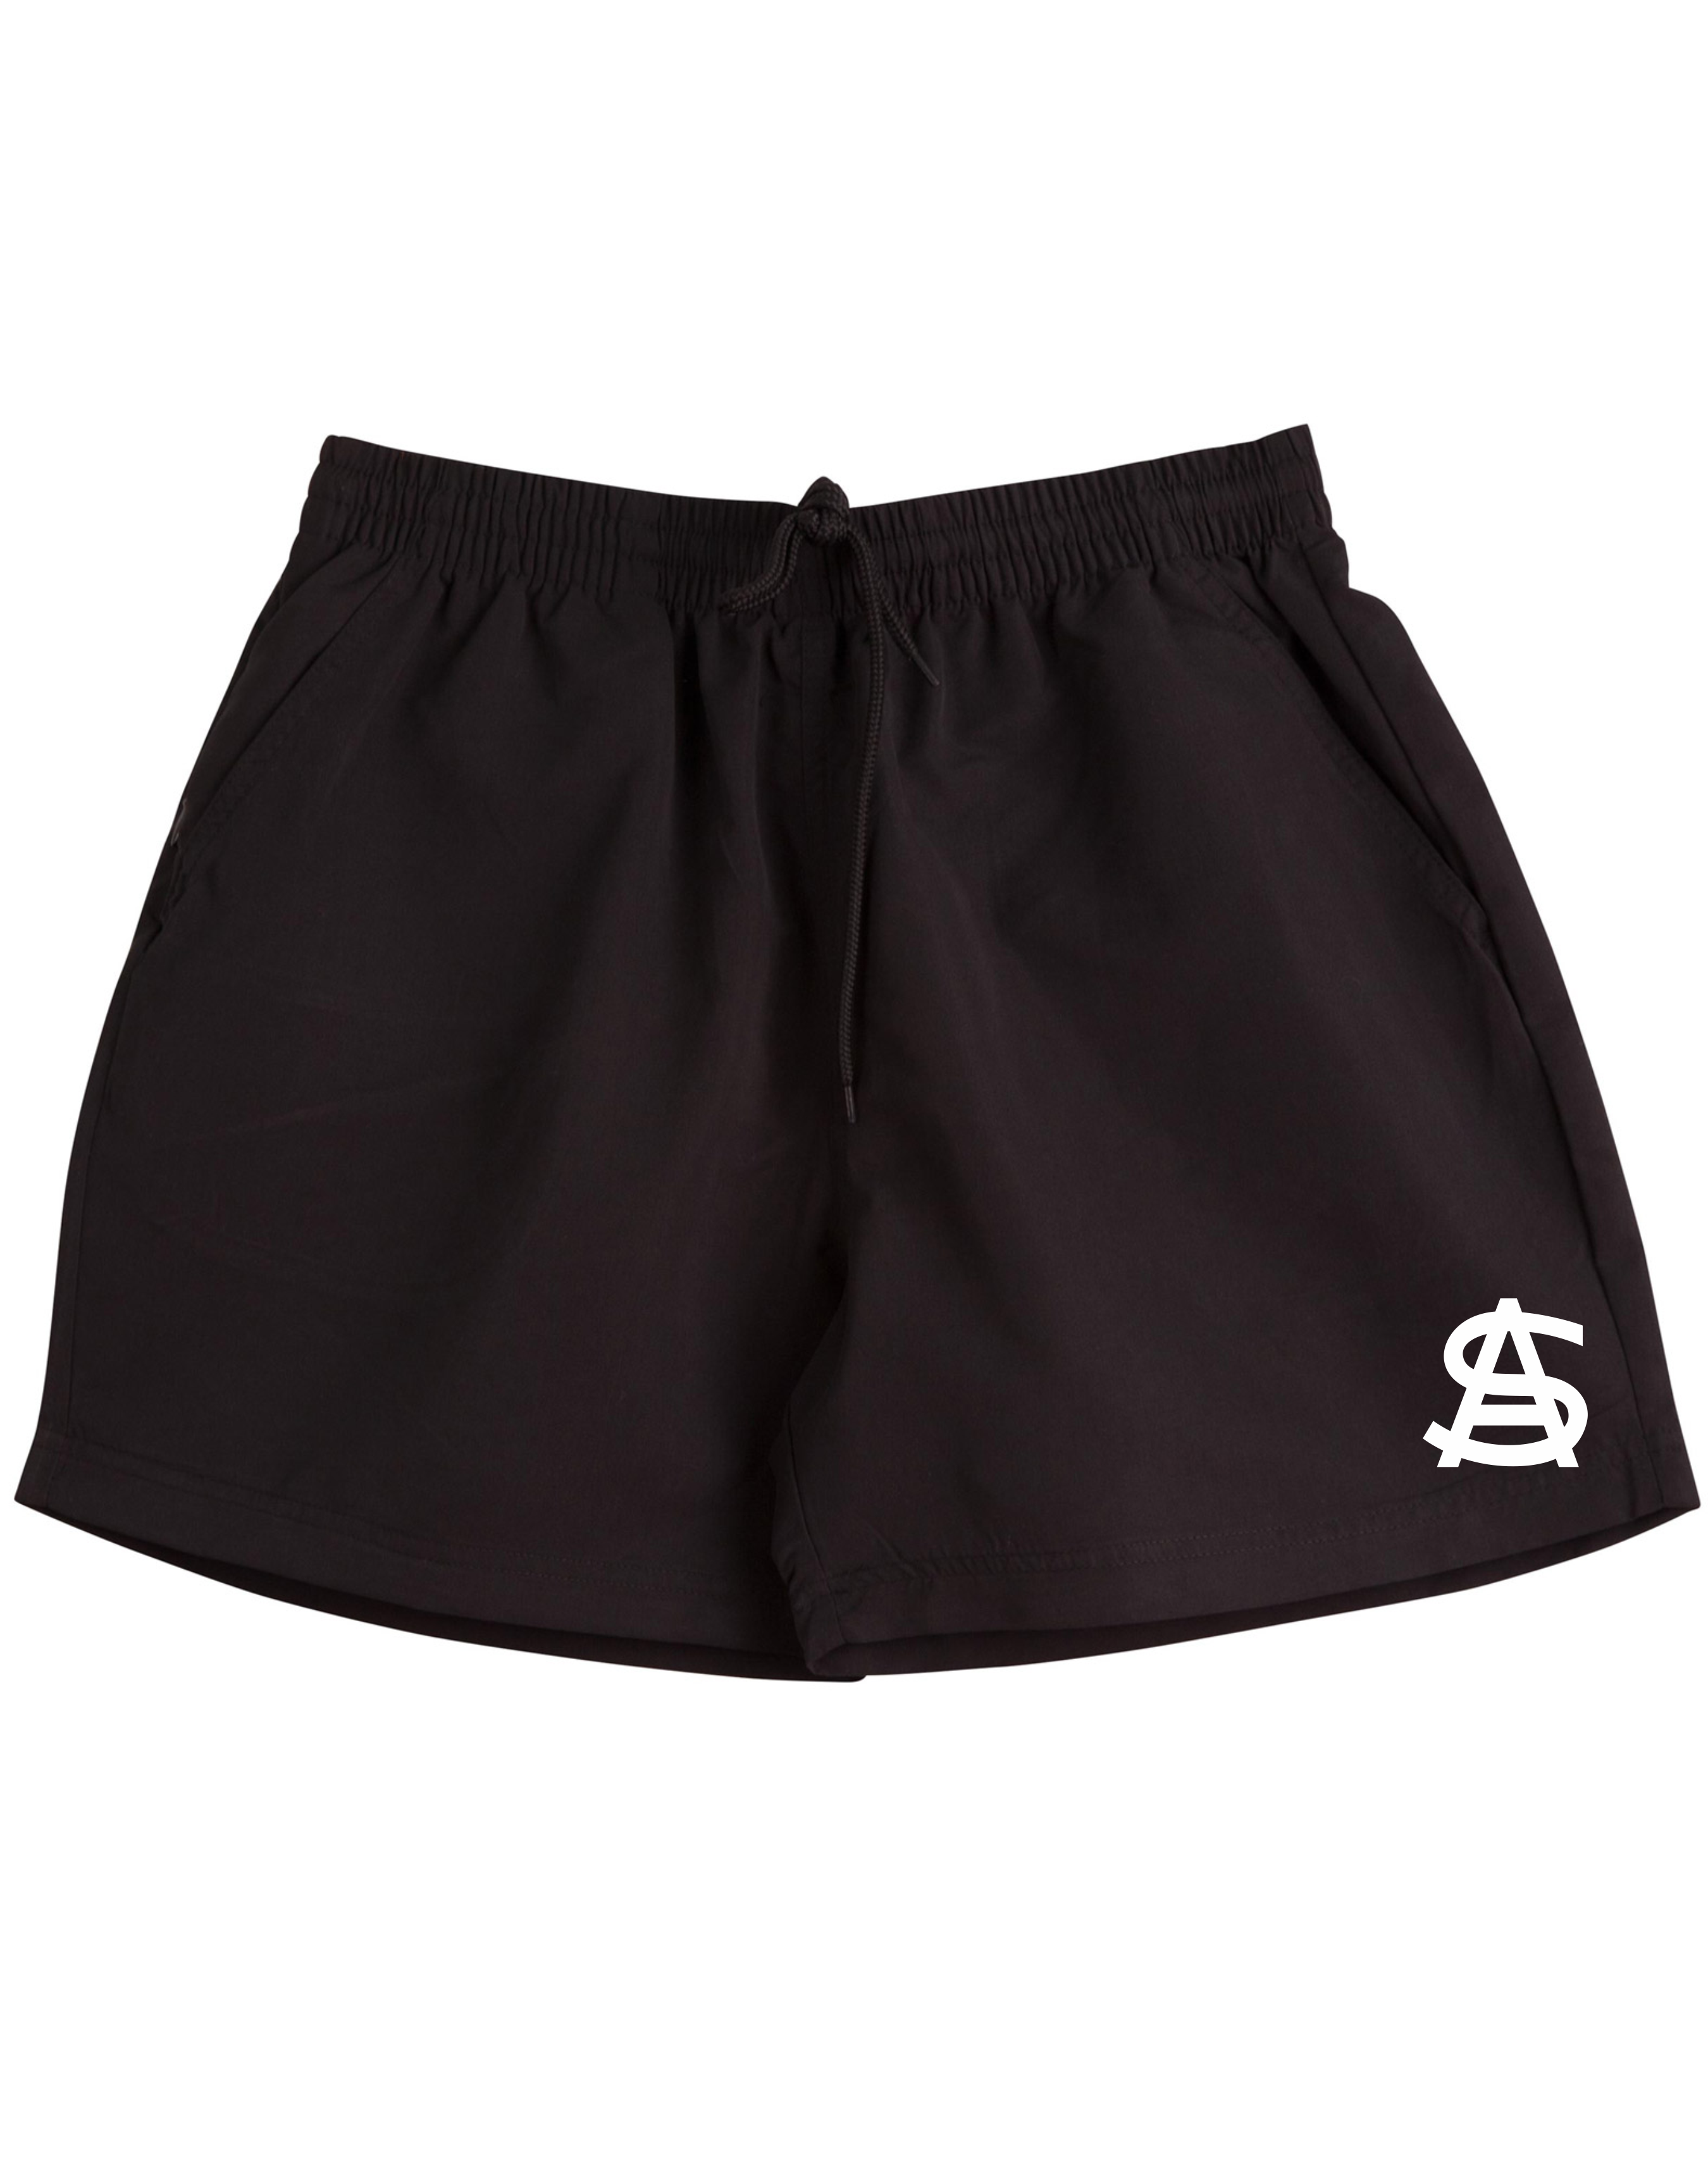 Adults Sports Short with pockets